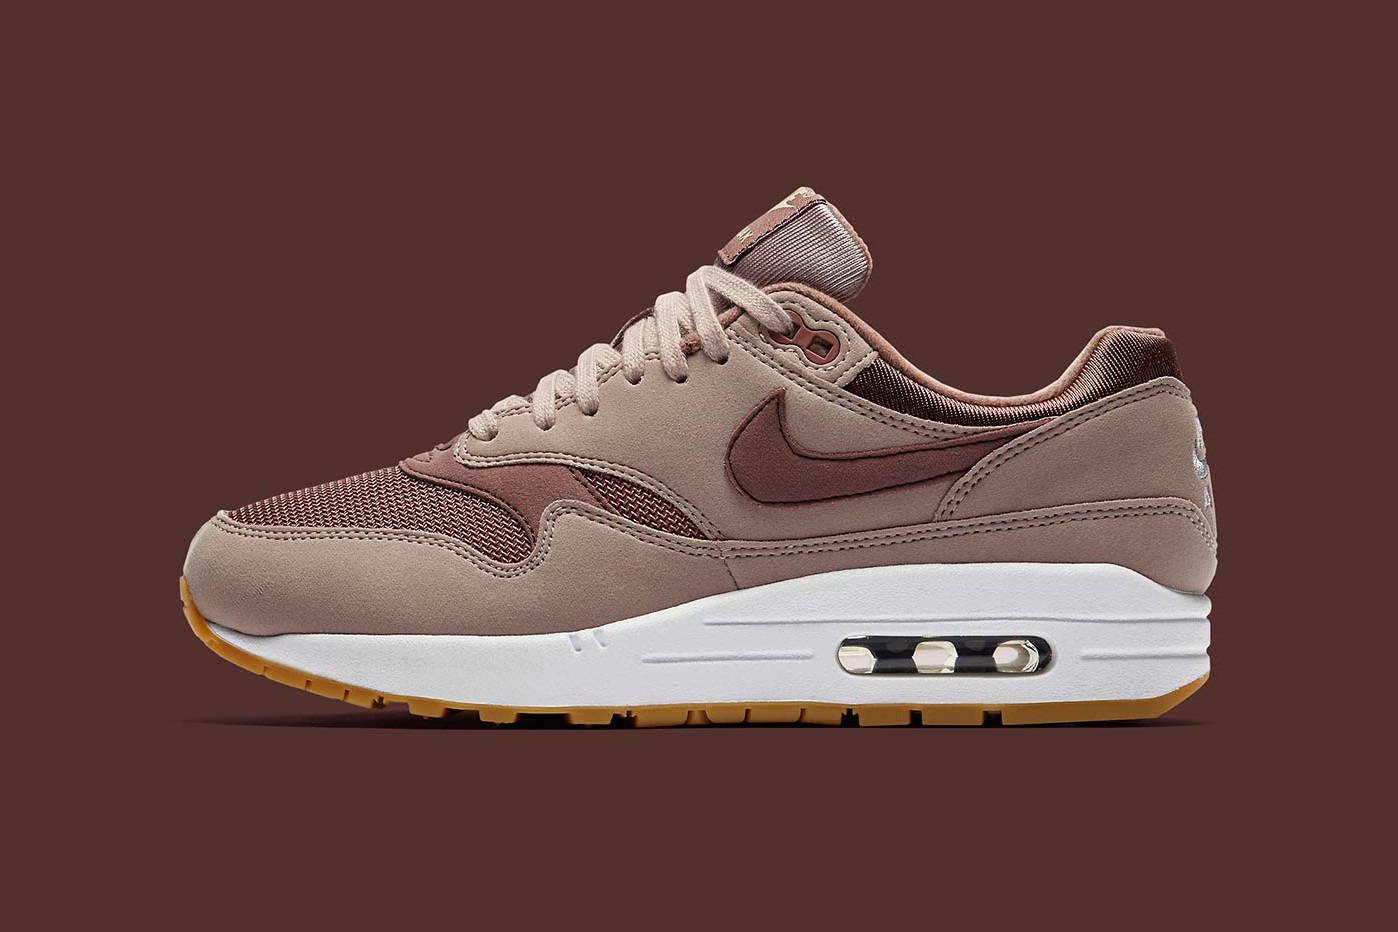 Nike Preps For Autumn With The Air Max 